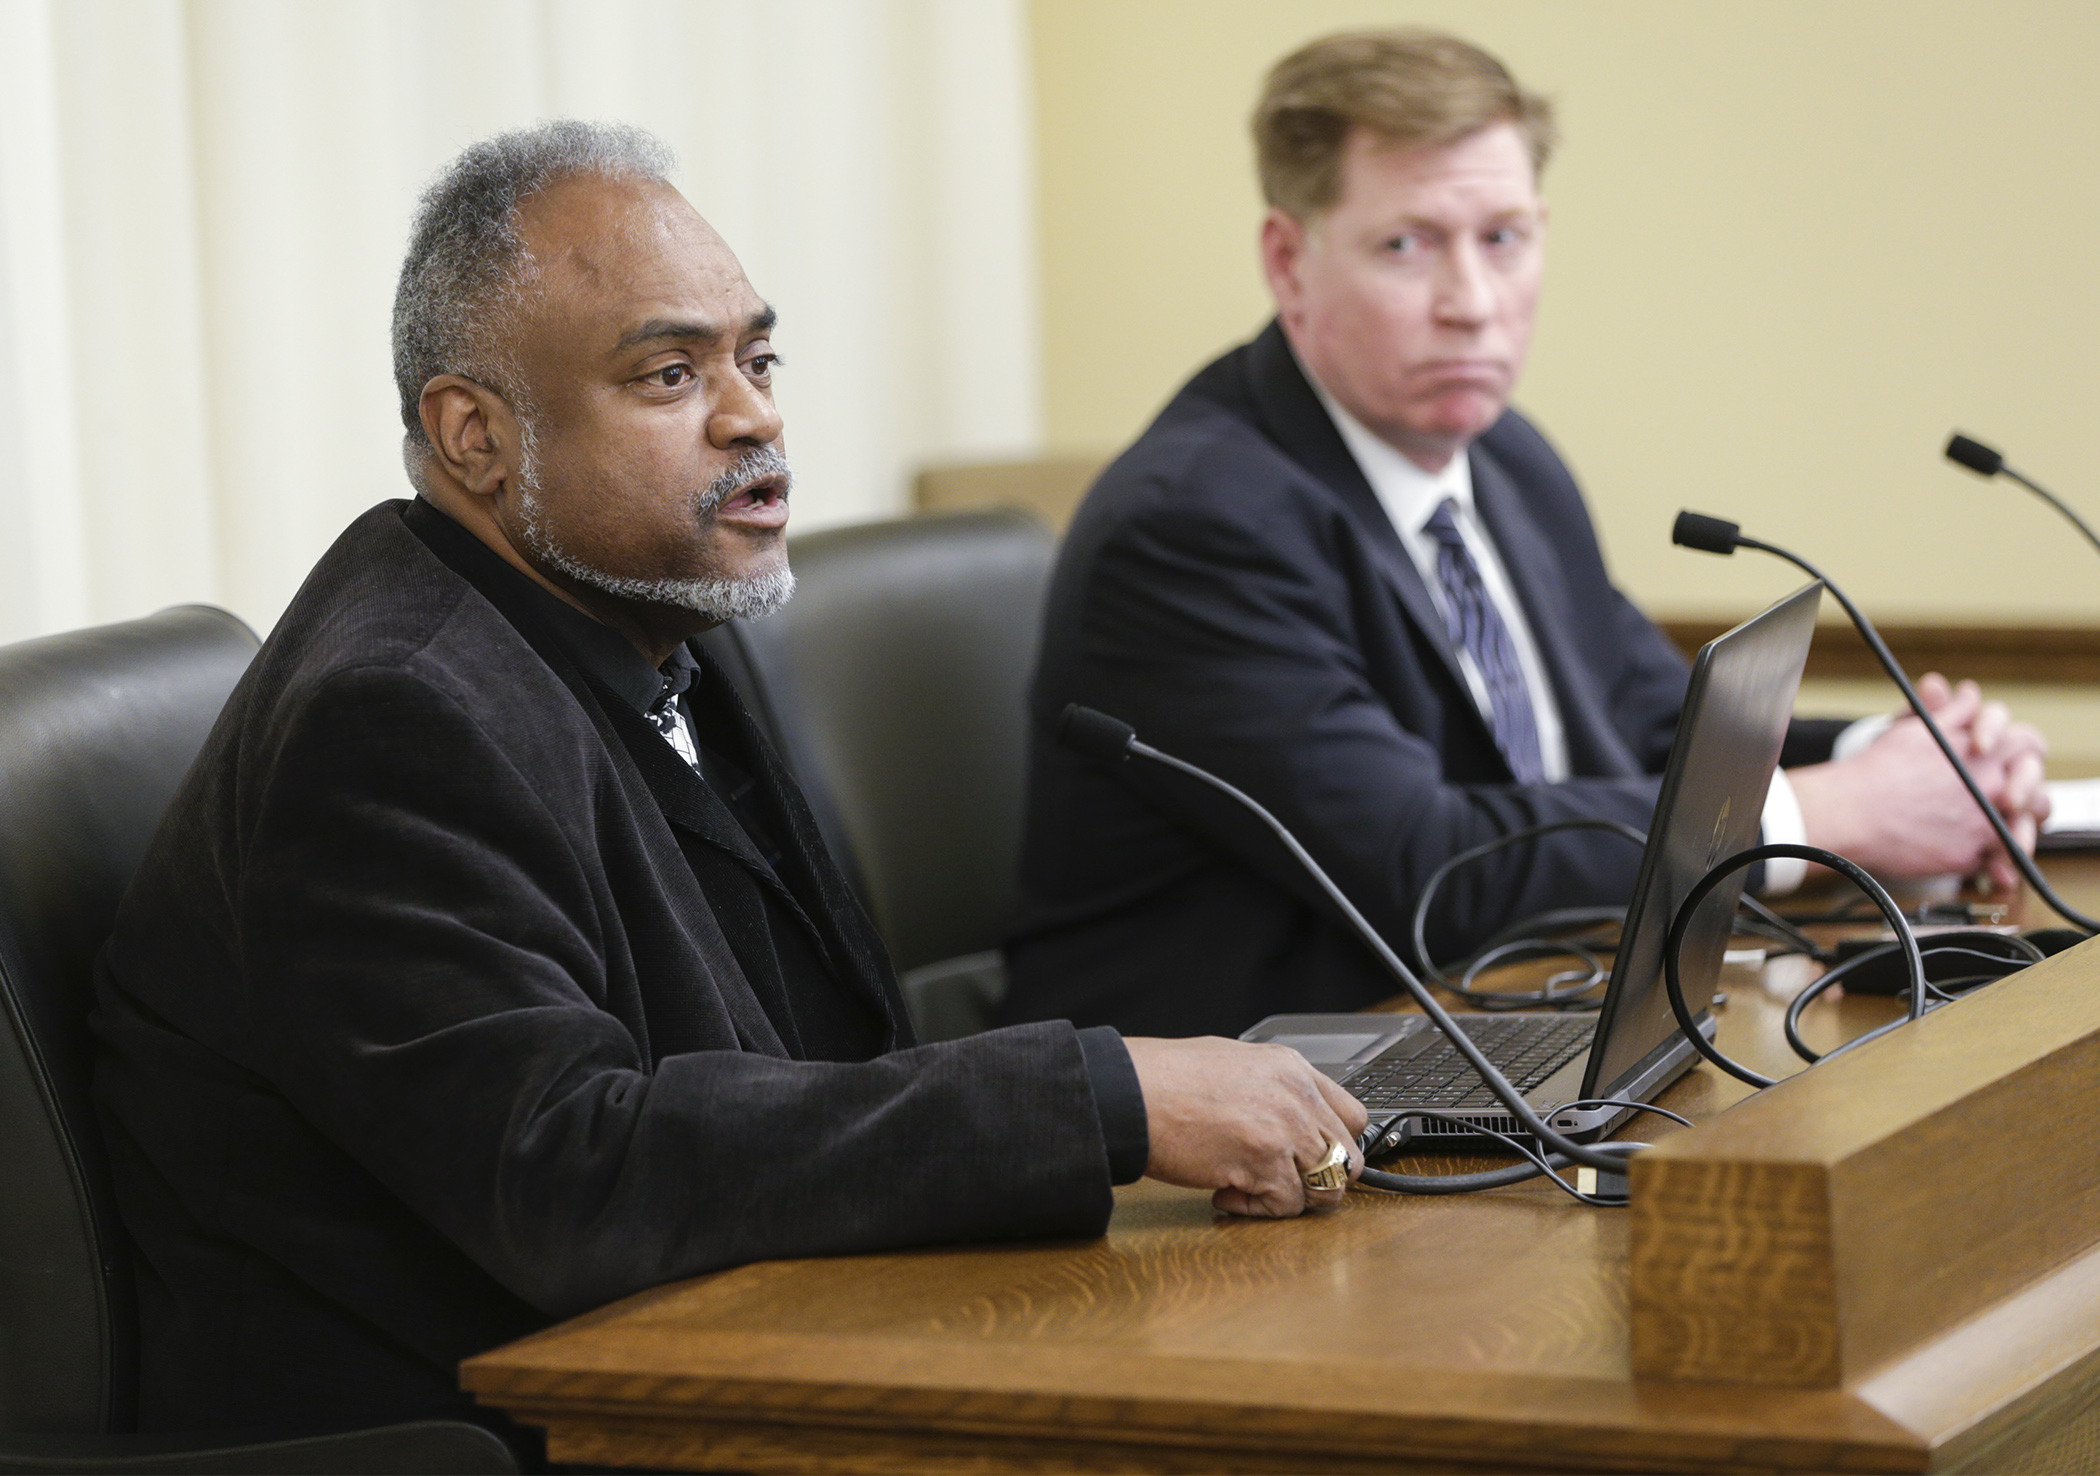 Public Safety Commissioner John Harrington testifies March 4 before the House Public Safety and Criminal Justice Reform Finance and Policy Division on the executive summary of the “State of Minnesota Working Group on Police-Involved Deadly Force Encounters.” Photo by Paul Battaglia